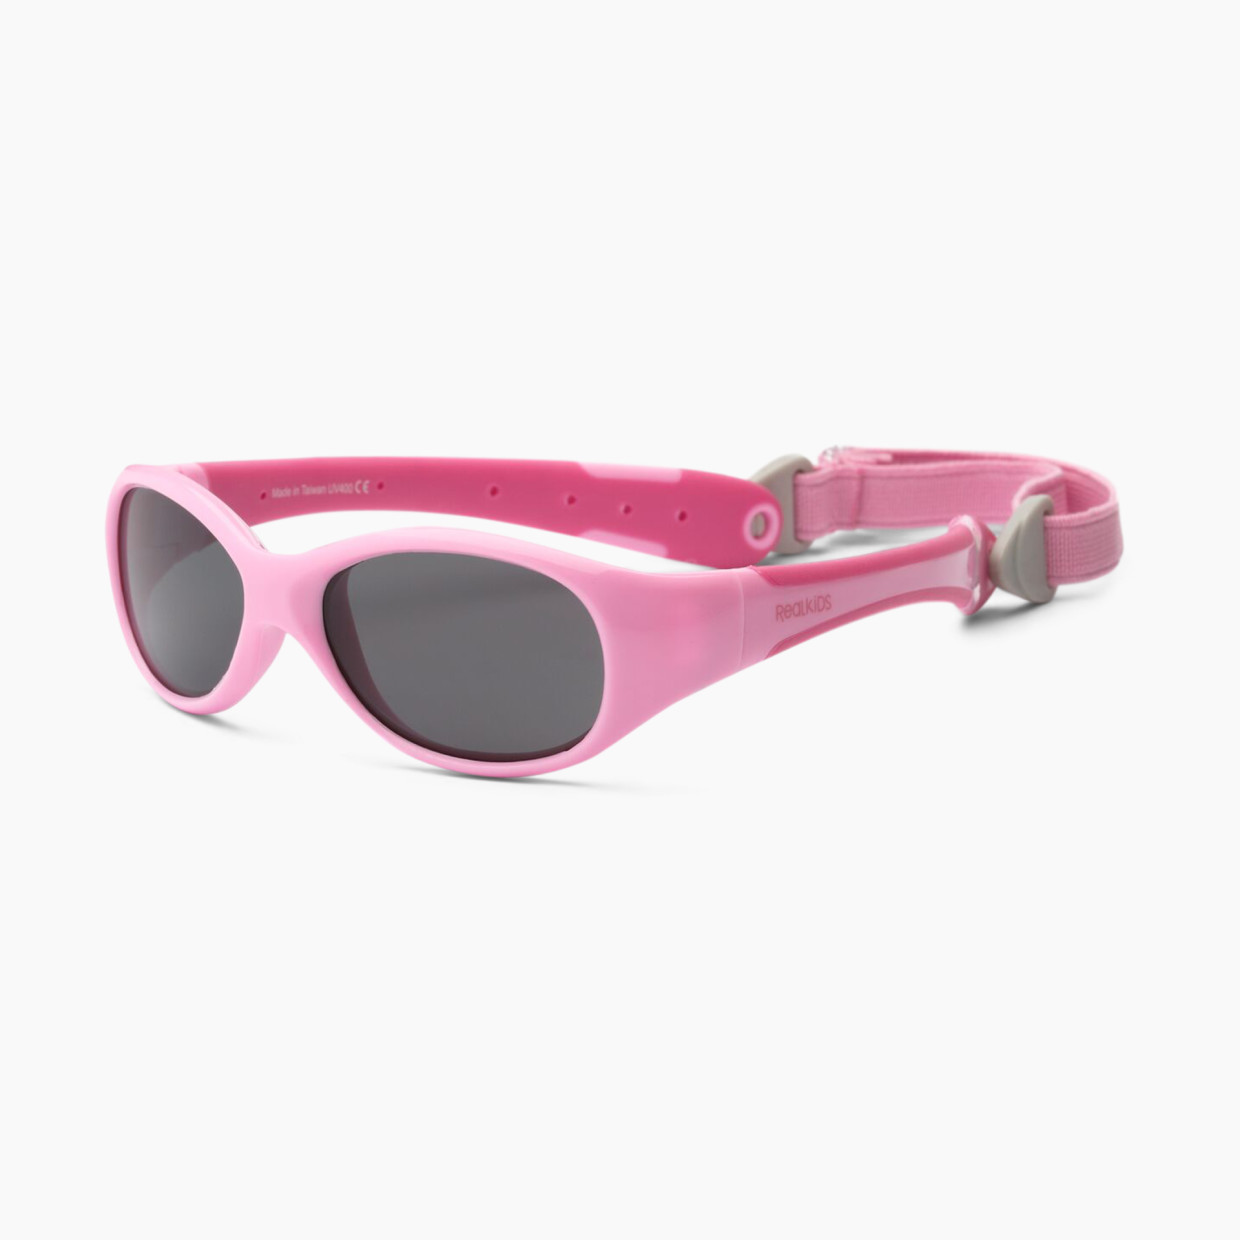 Real Shades Explorer Polarized Sunglasses - Pink/Pink, 0-24 Months.